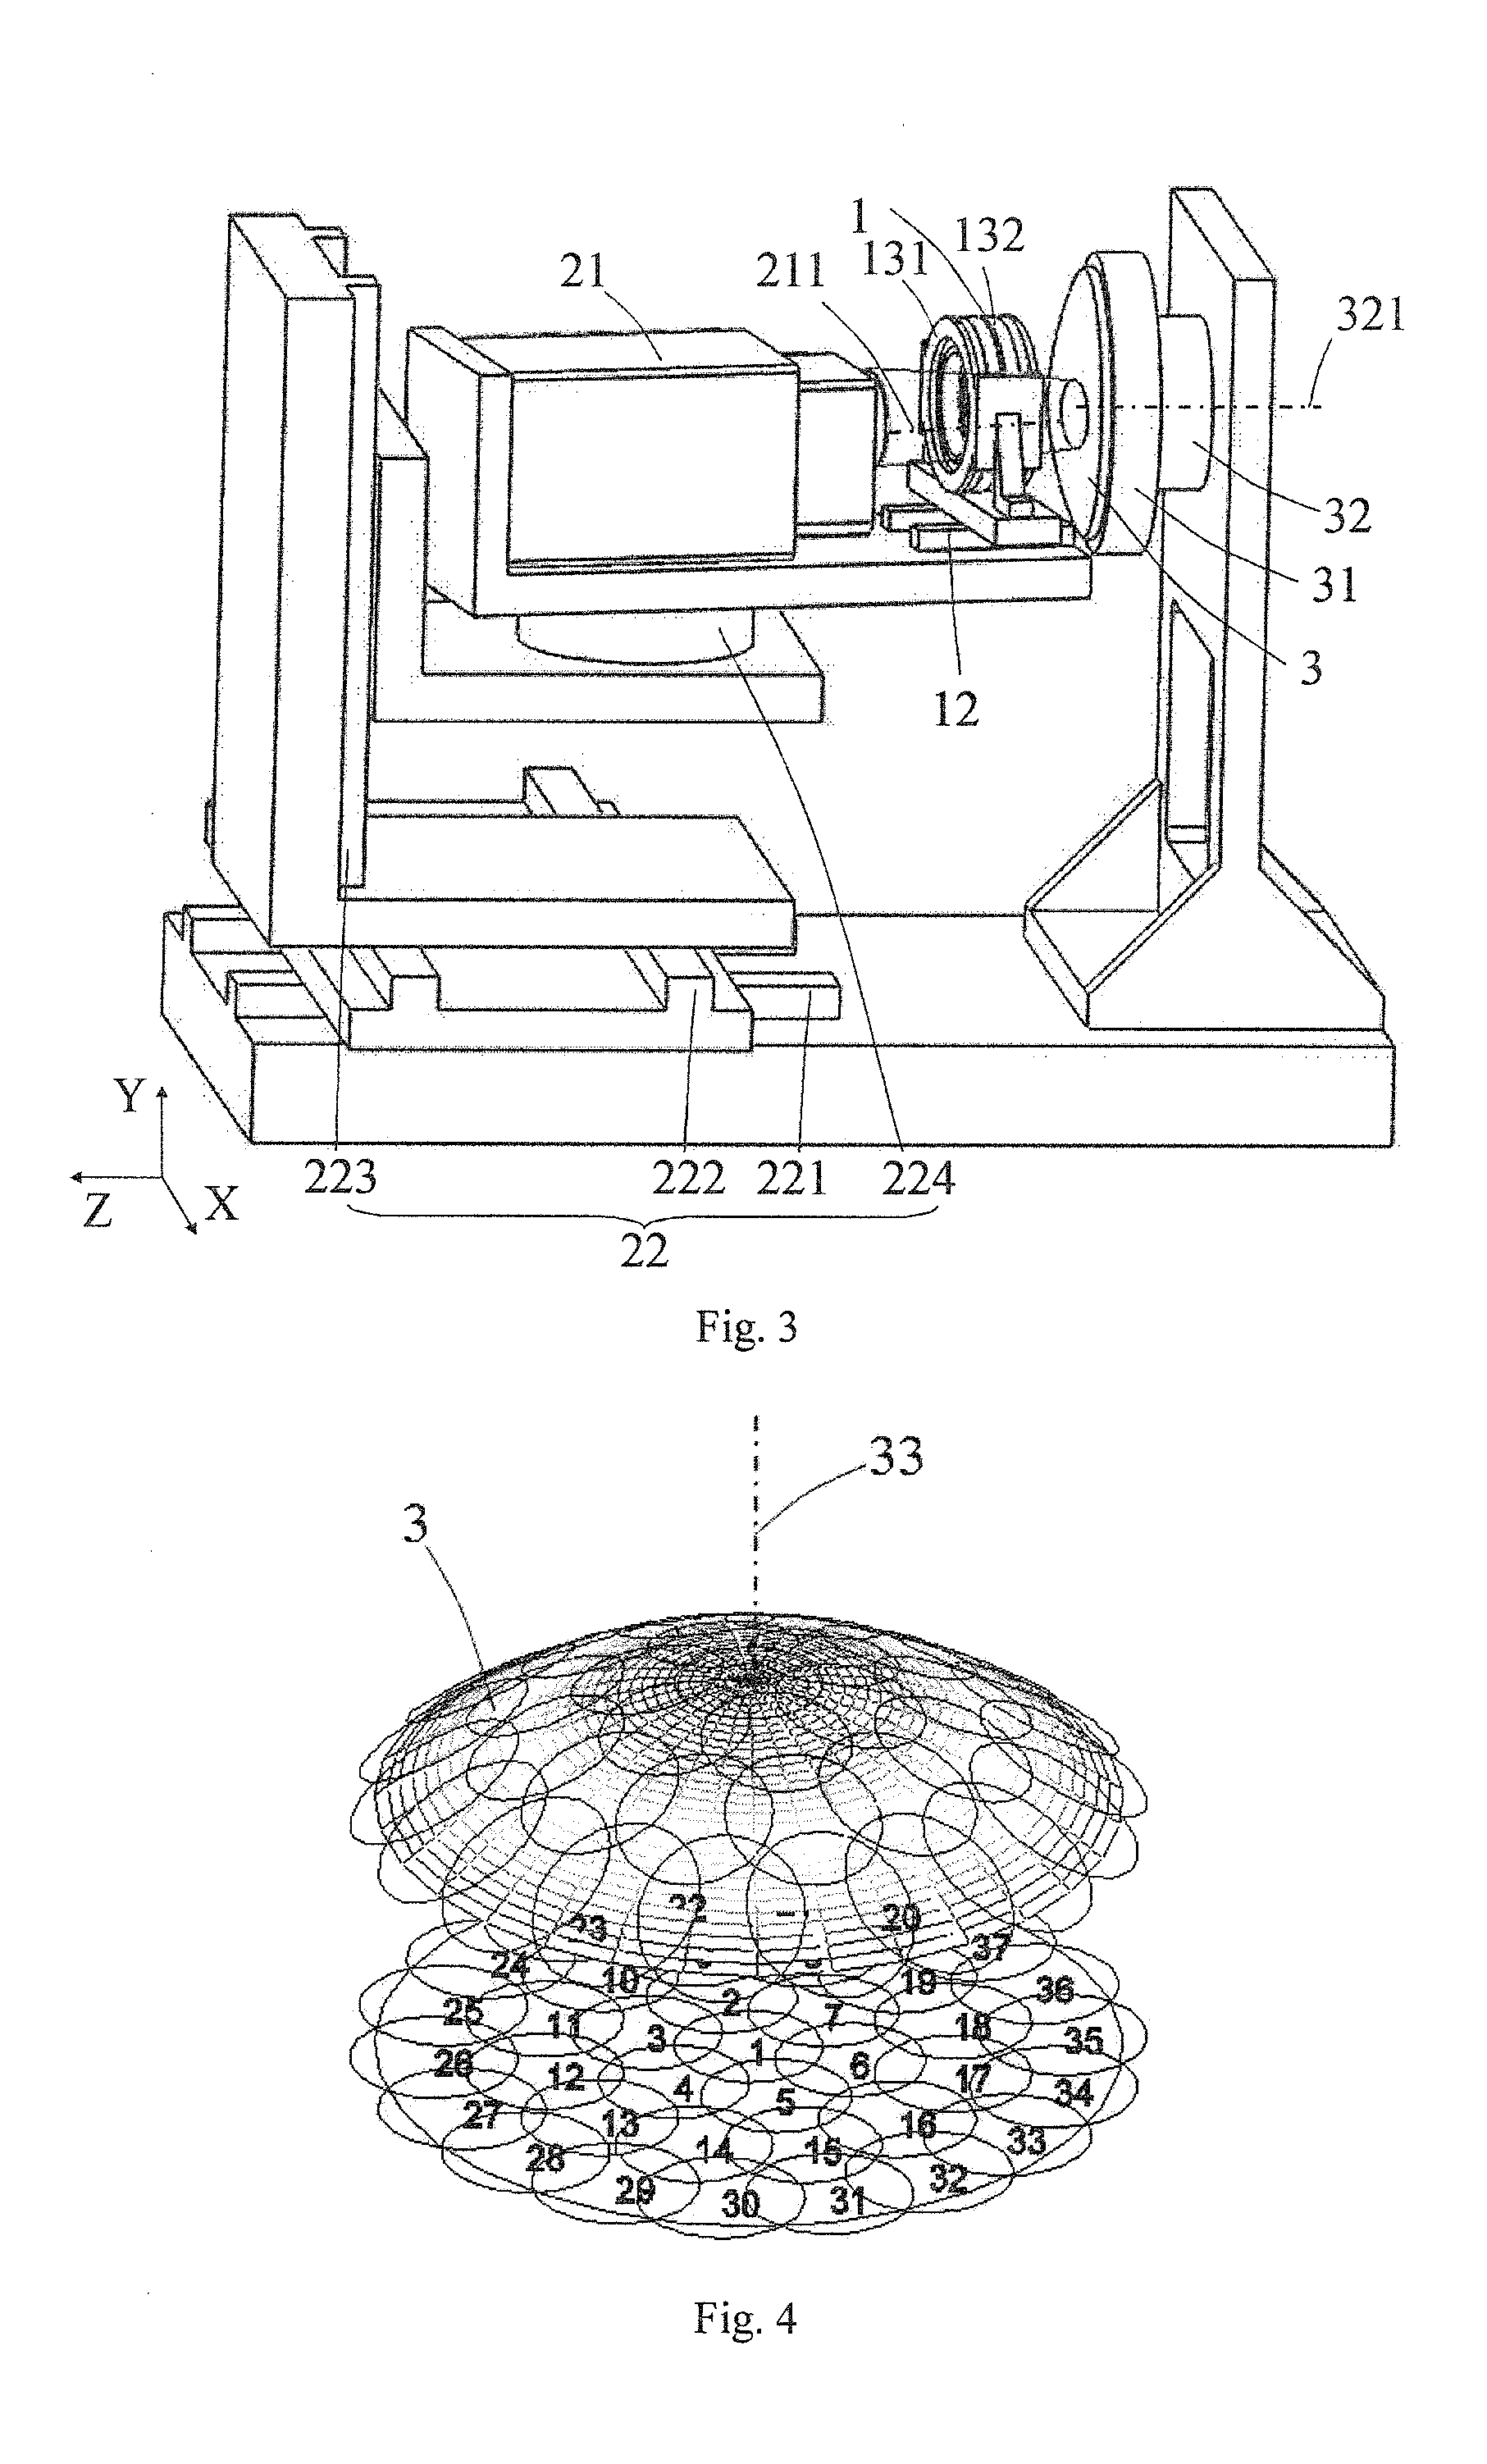 Near-Null Compensator and Figure Metrology Apparatus for Measuring Aspheric Surfaces by Subaperture Stitching and Measuring Method Thereof